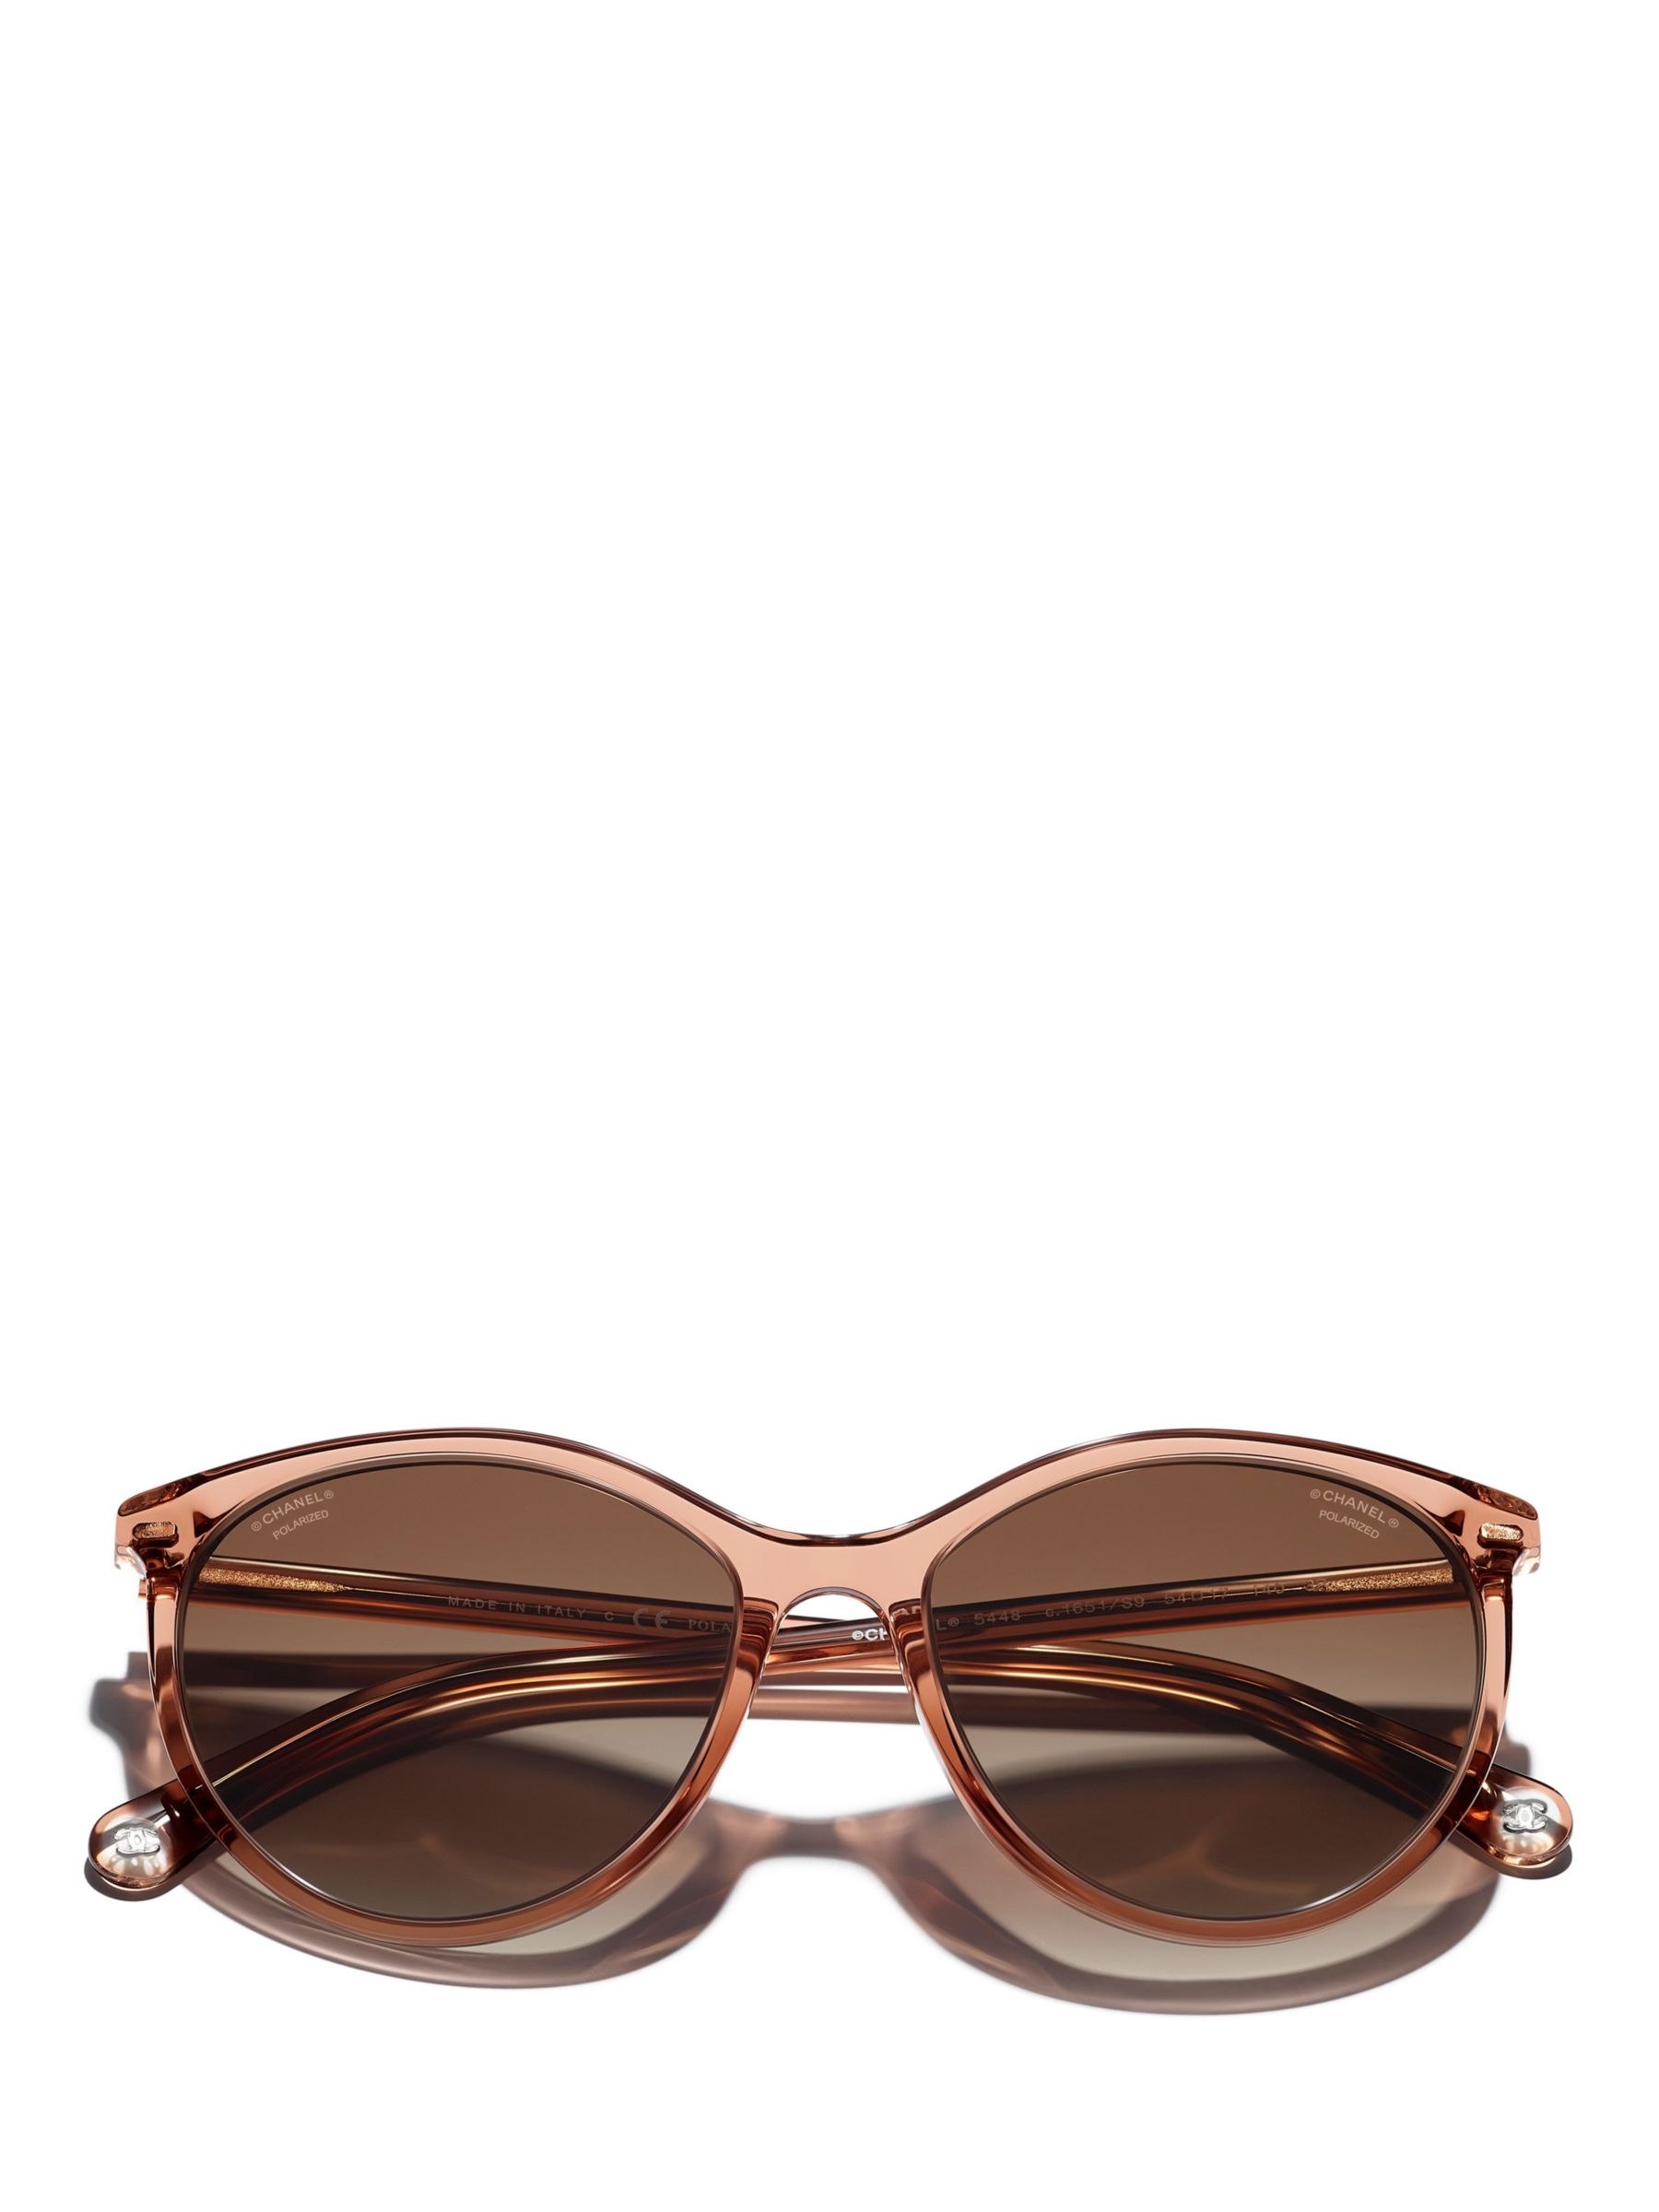 CHANEL Oval Sunglasses CH5448 Pink/Brown Gradient at John Lewis